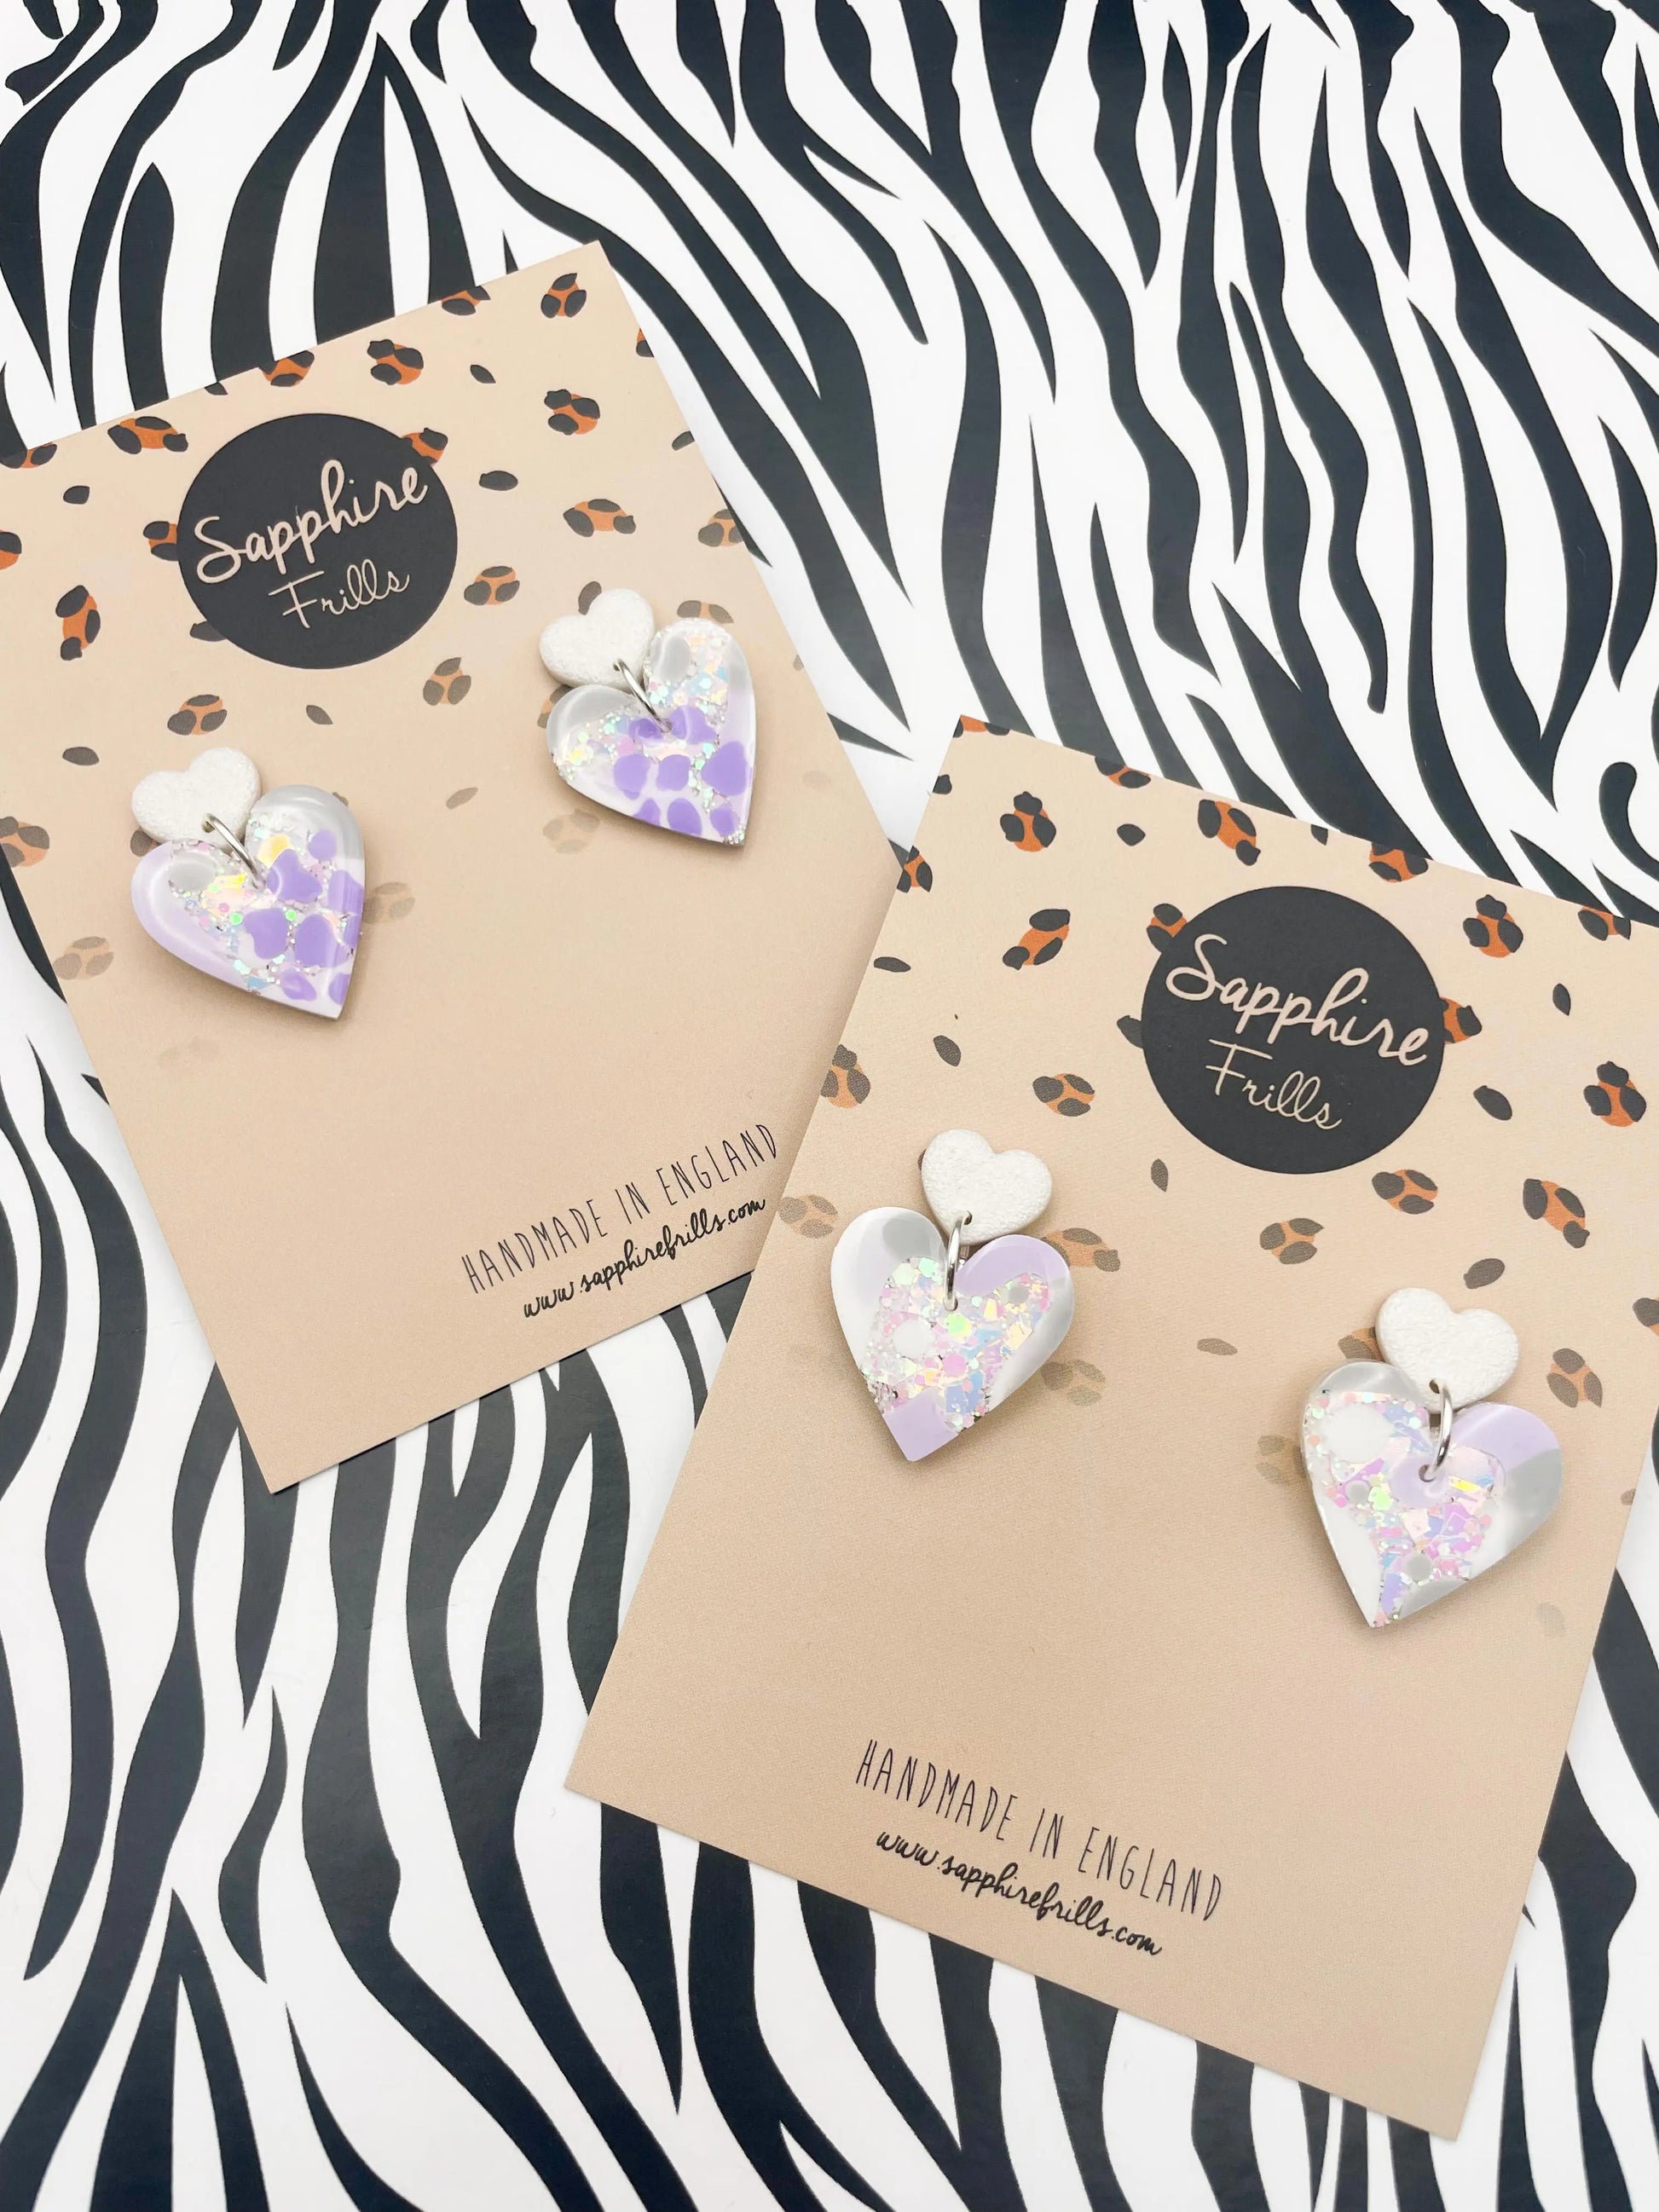 Iridescent and Lilac Cow Print Mosaic Glitter Resin Heart Dangle Earrings from Sapphire Frills